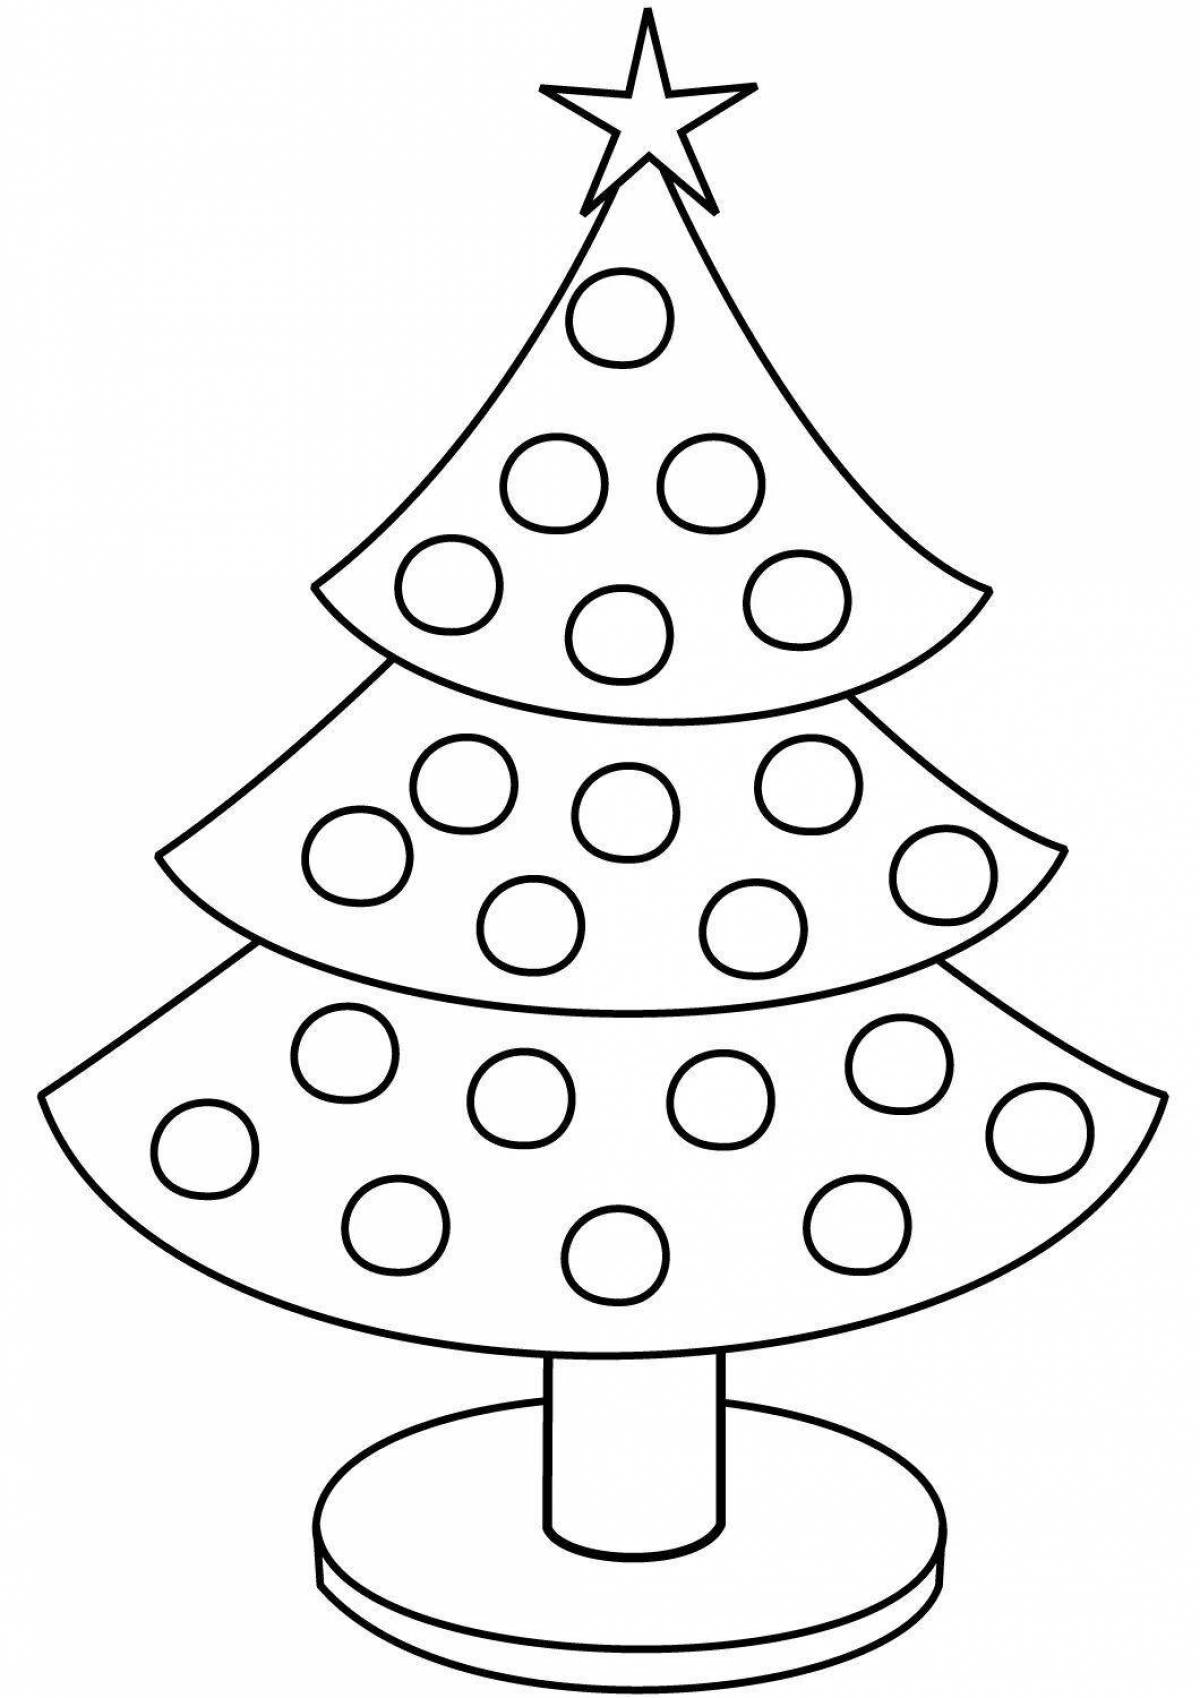 A dazzling Christmas tree coloring book for 5-6 year olds